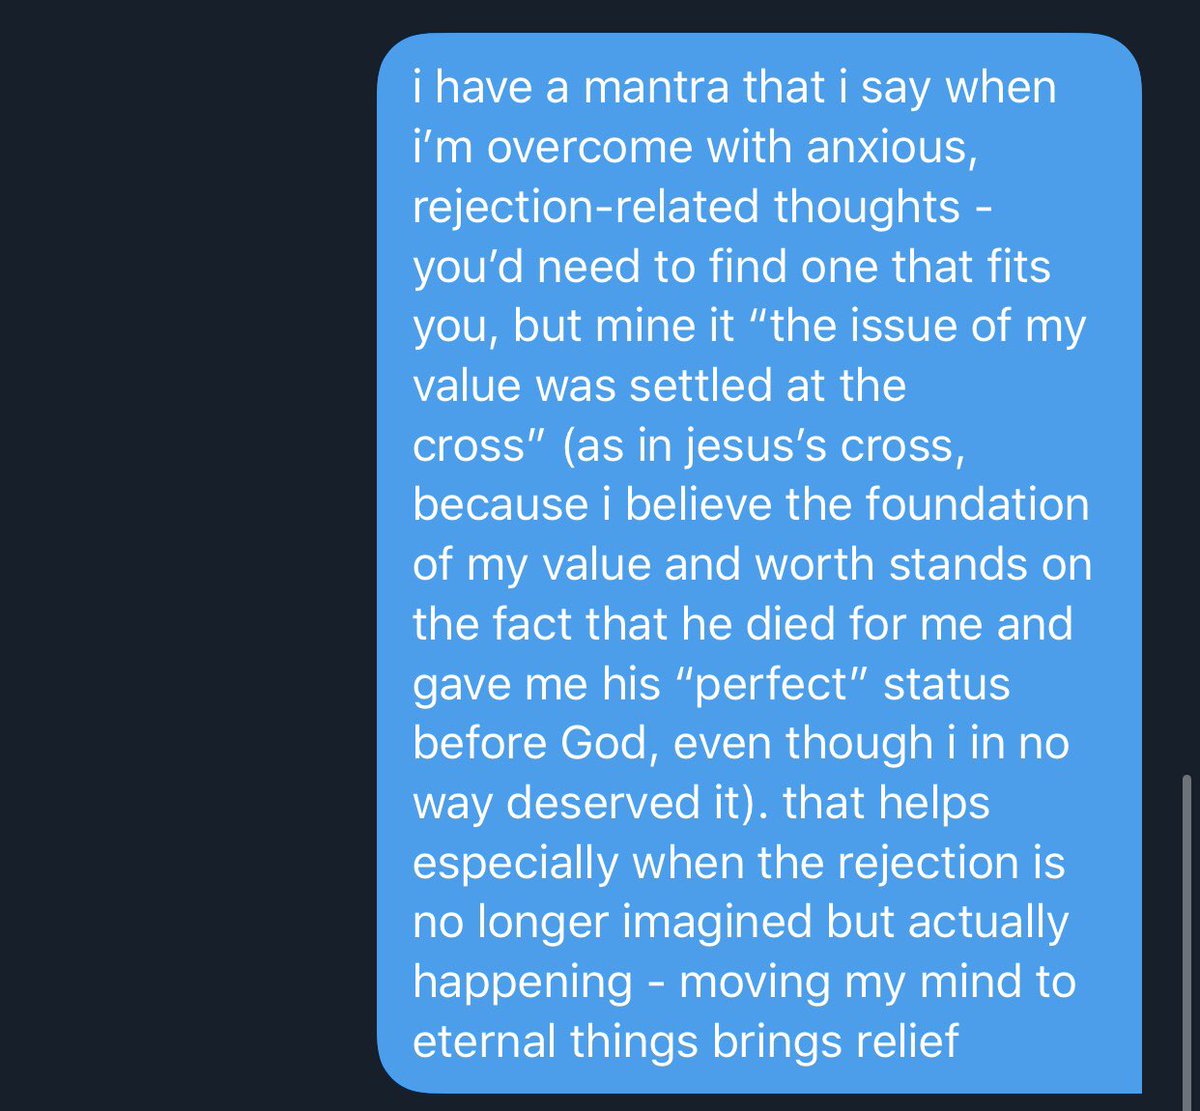 someone DM’d me asking for tips and here’s what i wrote up real fast: